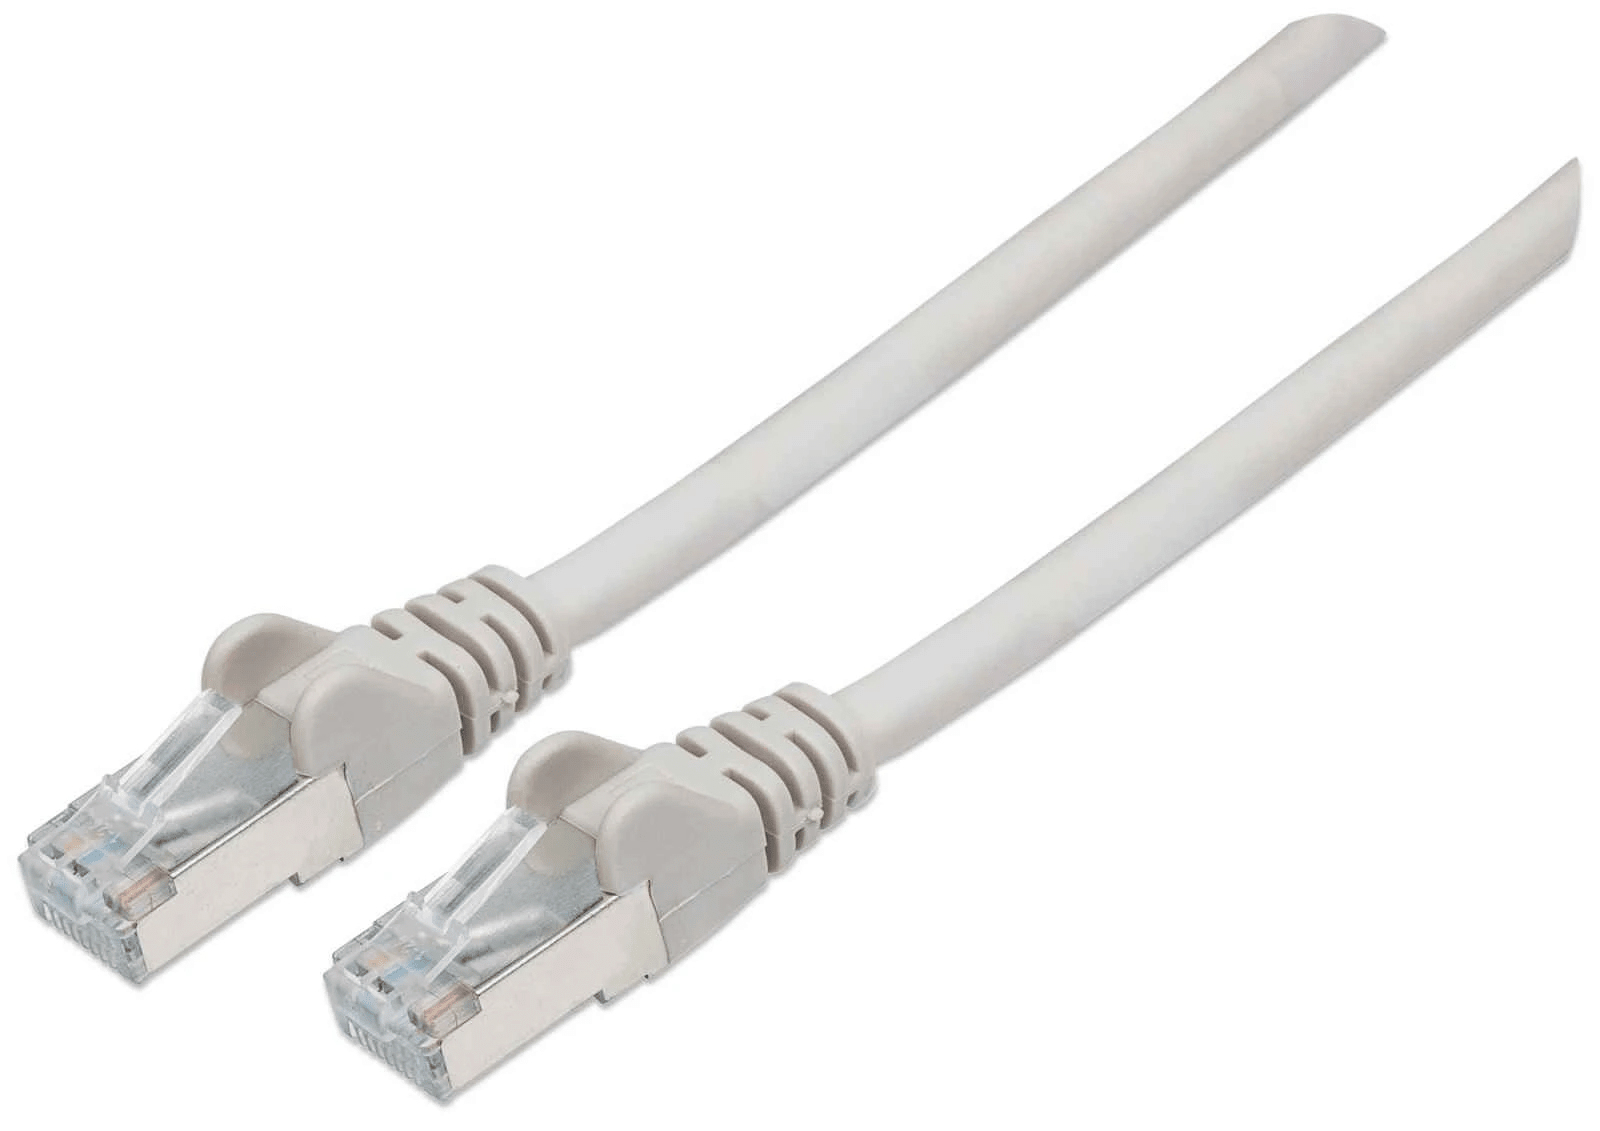 Photos - Cable (video, audio, USB) INTELLINET Network Patch Cable, Cat7 Cable/Cat6A Plugs, 0.25m, Grey, C 740 